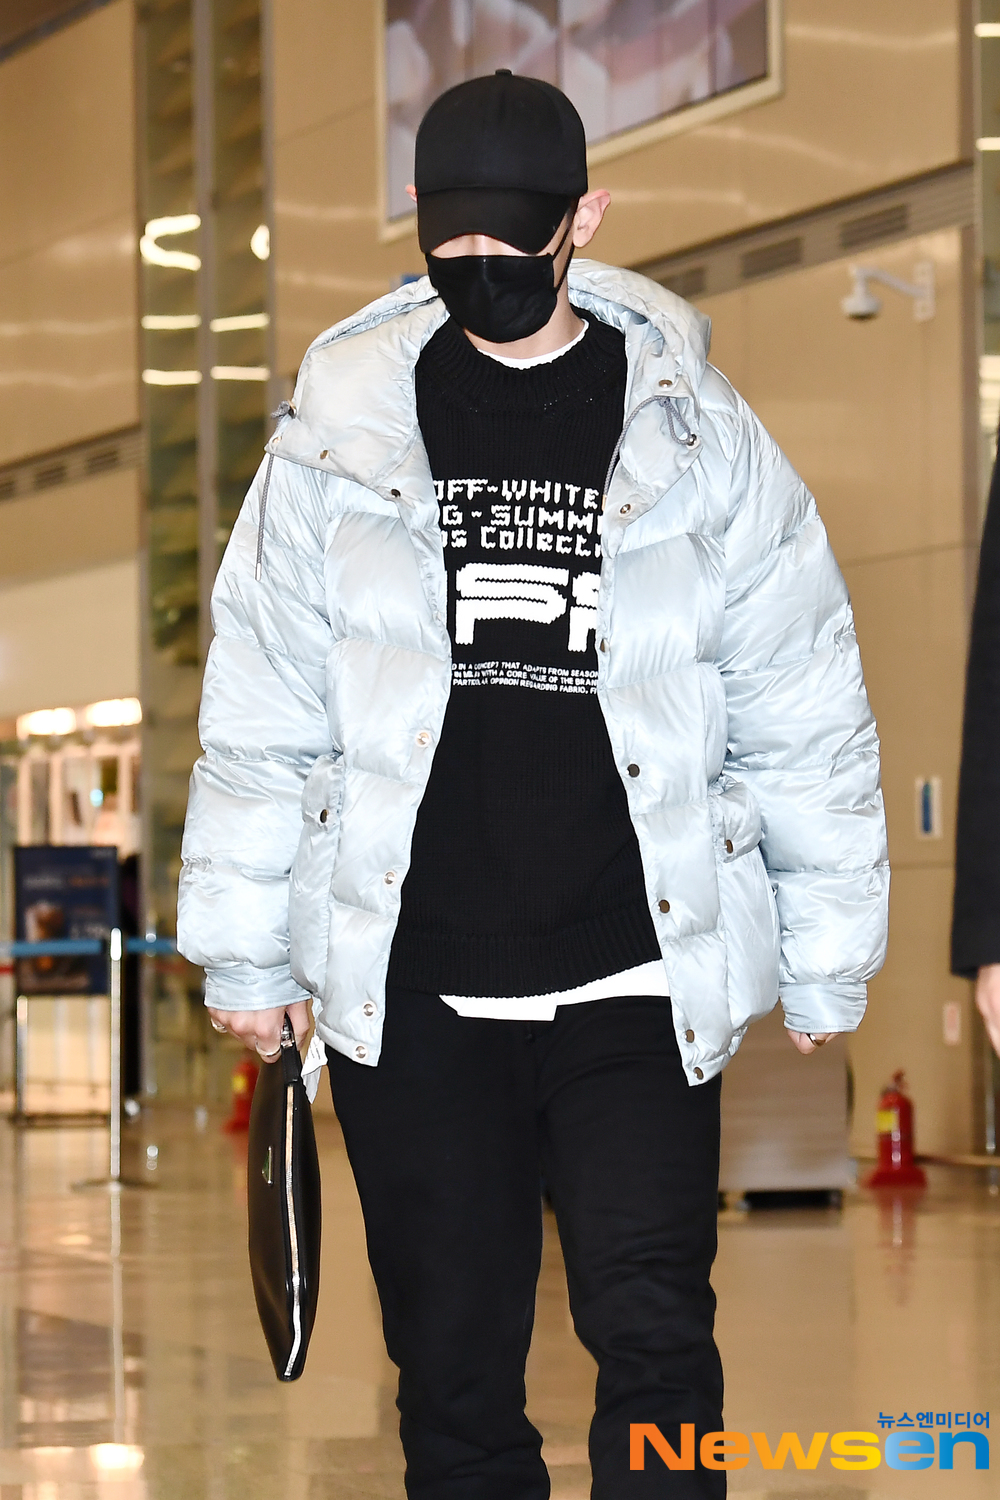 EXO (EXO) member Chanyeol (CHANYEOL) arrives at the Incheon International Airport in Unseo-dong, Jung-gu, Incheon, after completing an overseas schedule on the morning of January 24.exponential earthquake